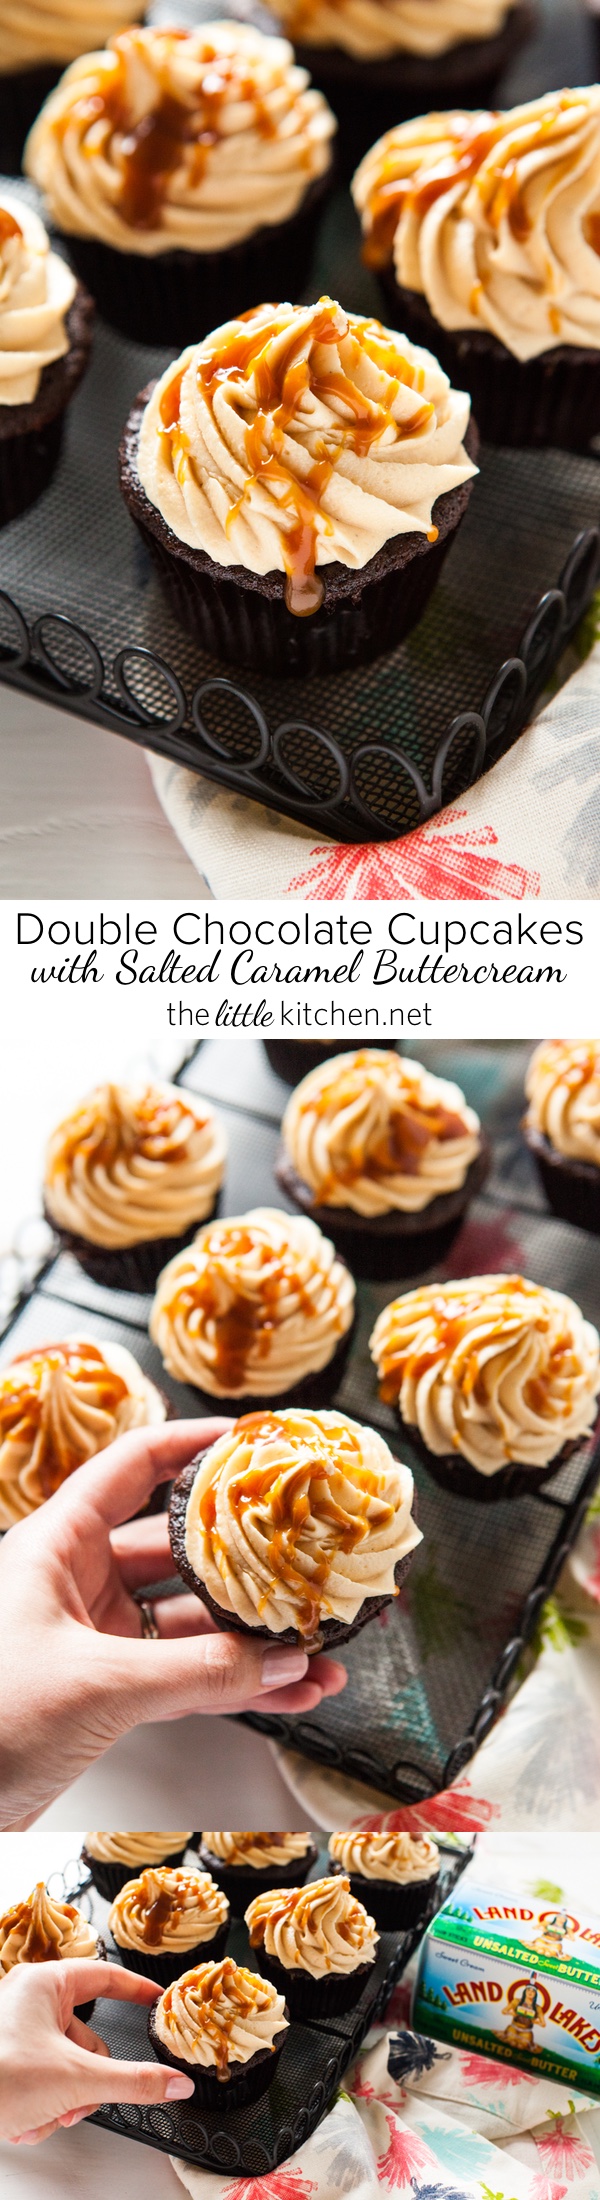 Double Chocolate Cupcakes with Salted Caramel Buttercream from thelittlekitchen.net